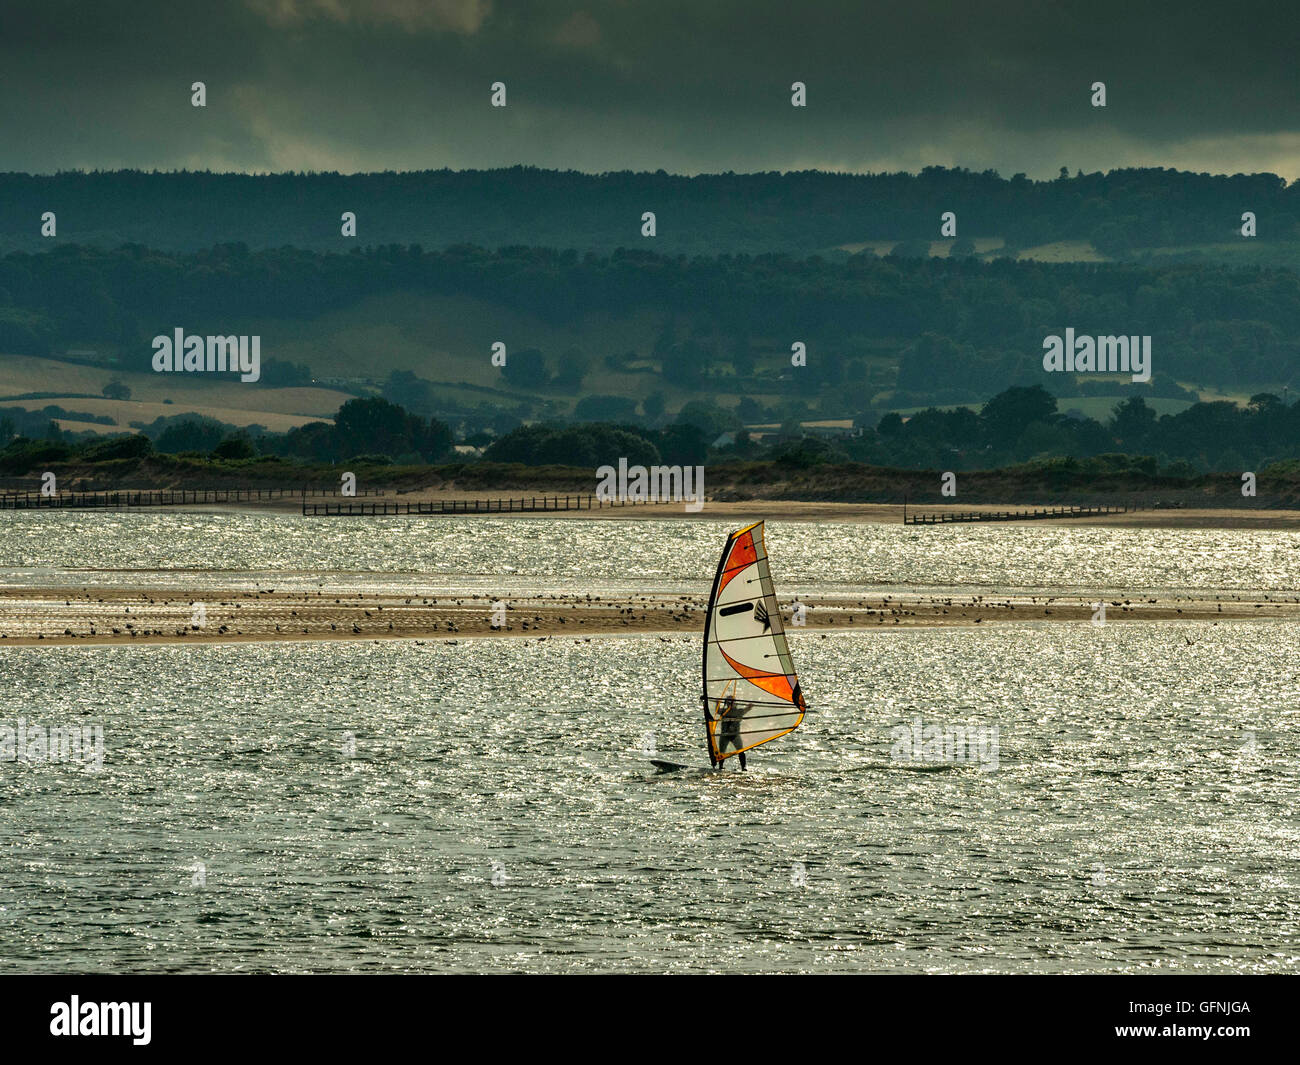 Windsurfing along the beautiful Jurassic seaside coast around the mouth of the River Exe estuary, with blue sea and sky. Stock Photo